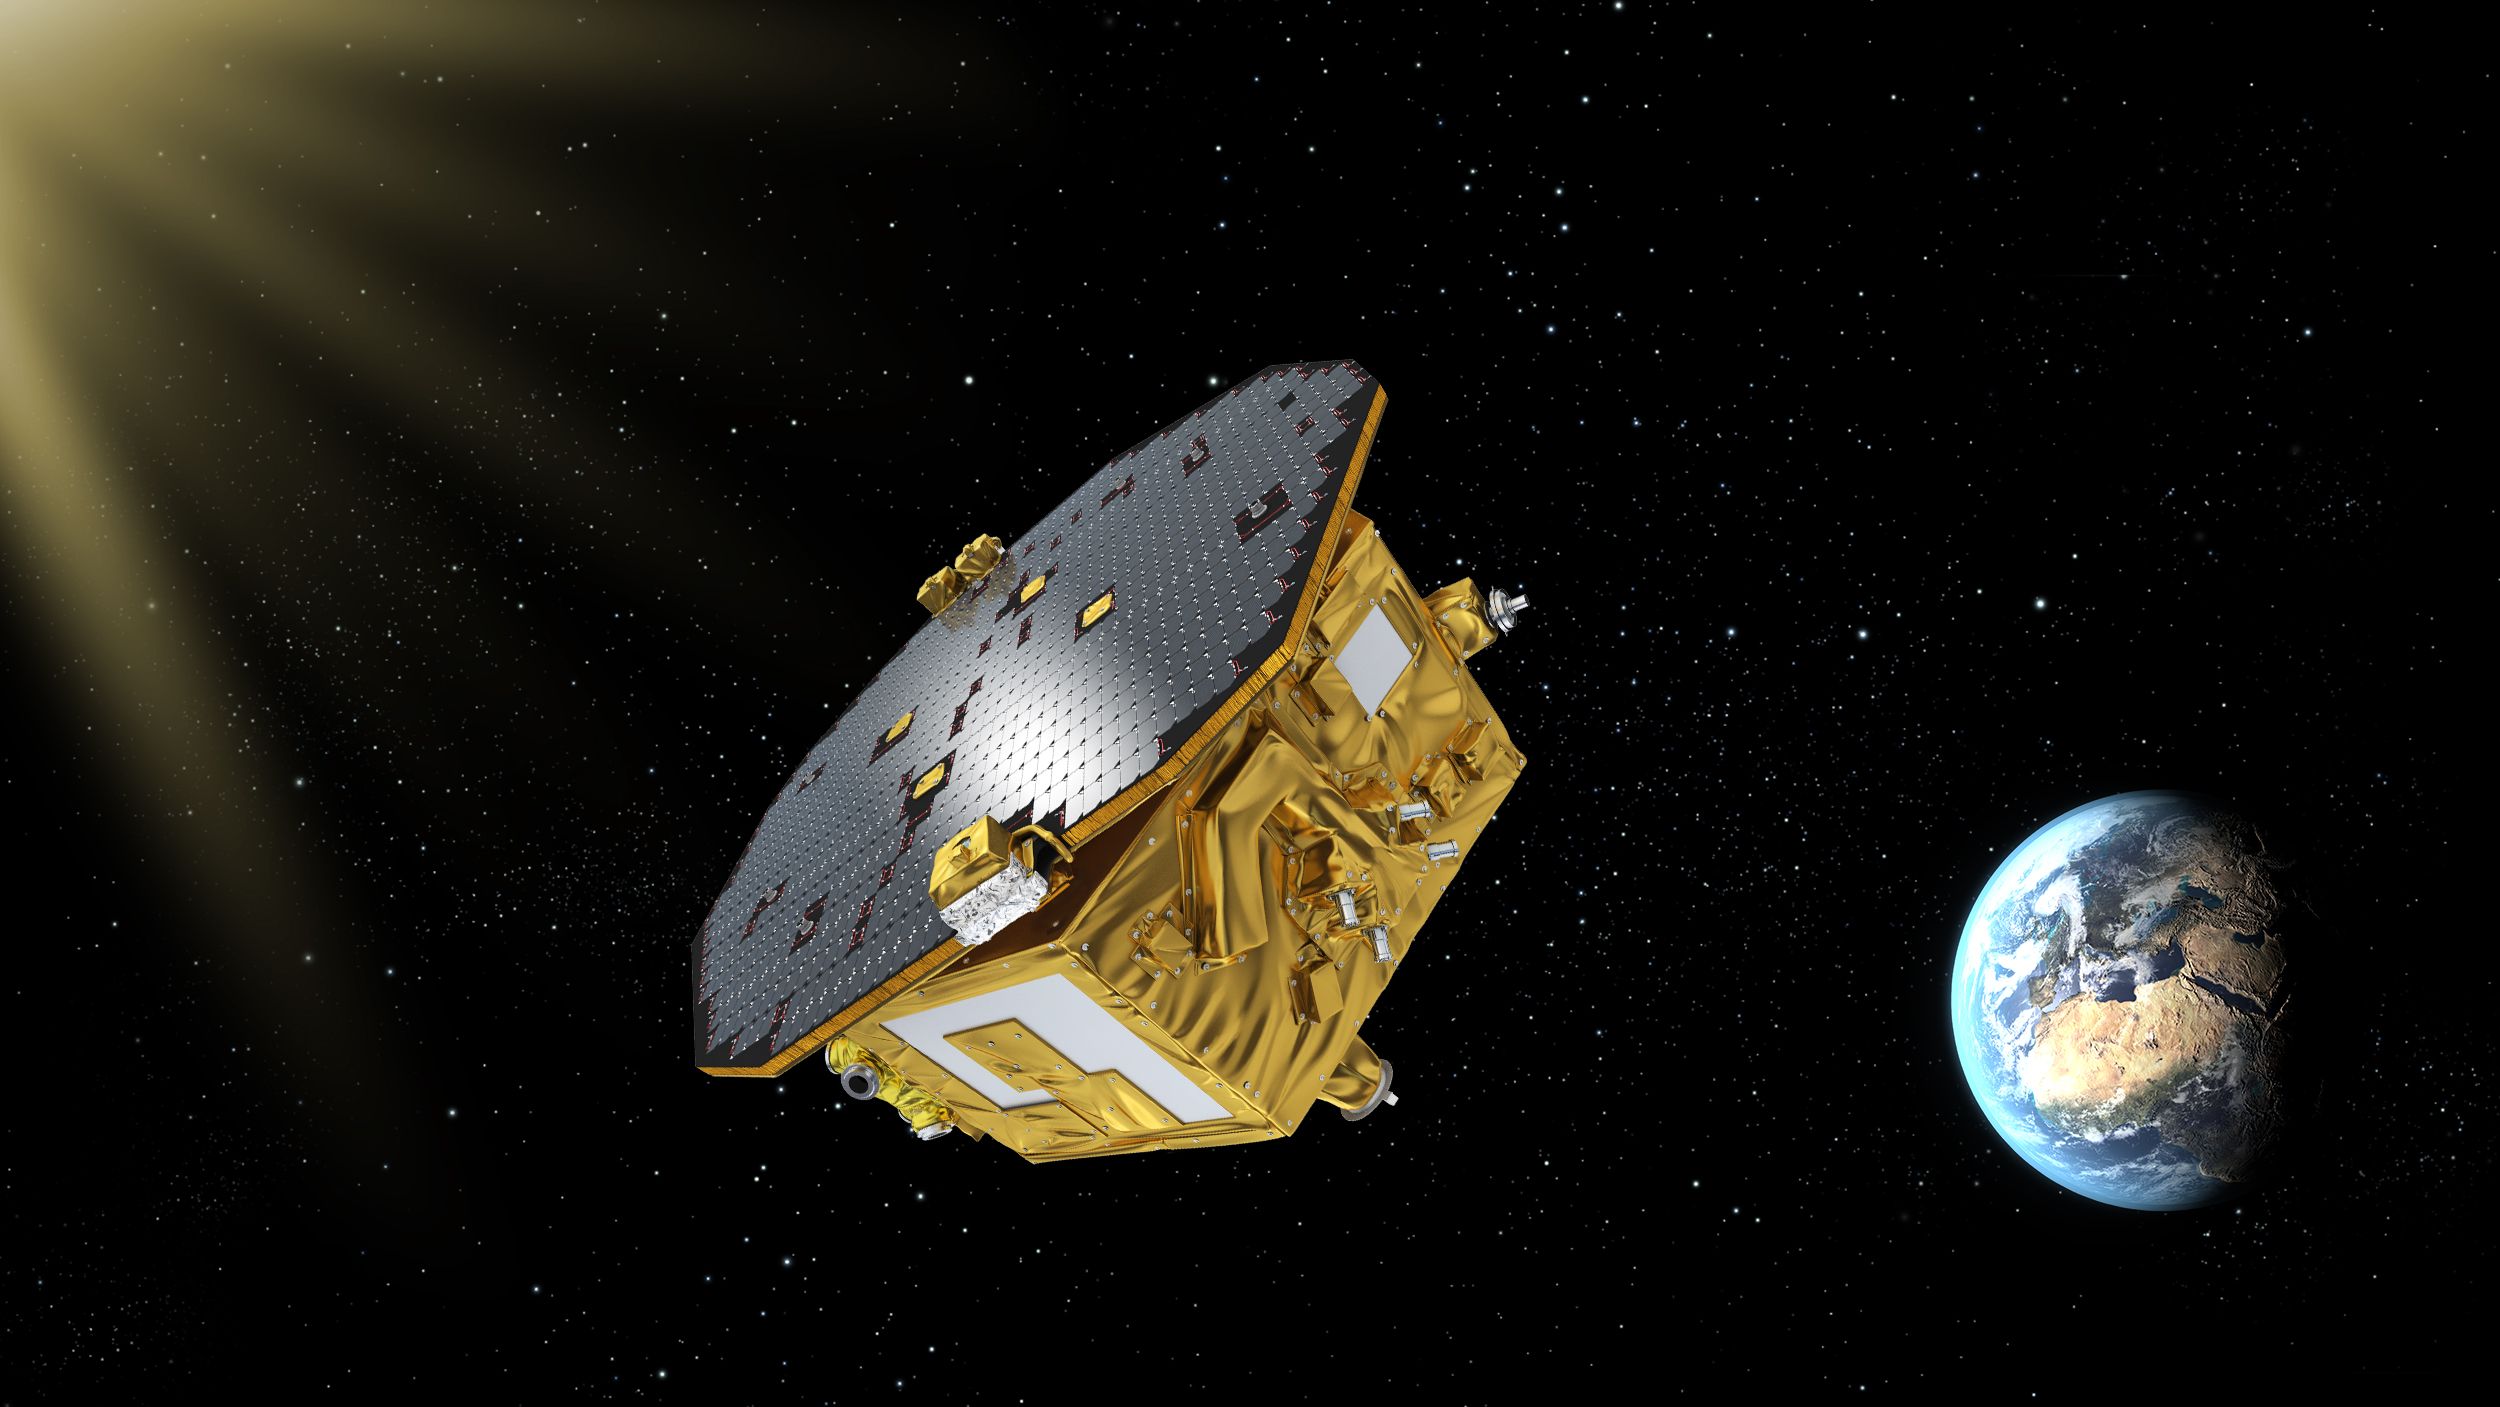 LISA Pathfinder operated from a vantage point in space about 1.5 million km from Earth towards the Sun, orbiting the first Sun-Earth Lagrangian point, L1. Credit: ESA - C.Carreau